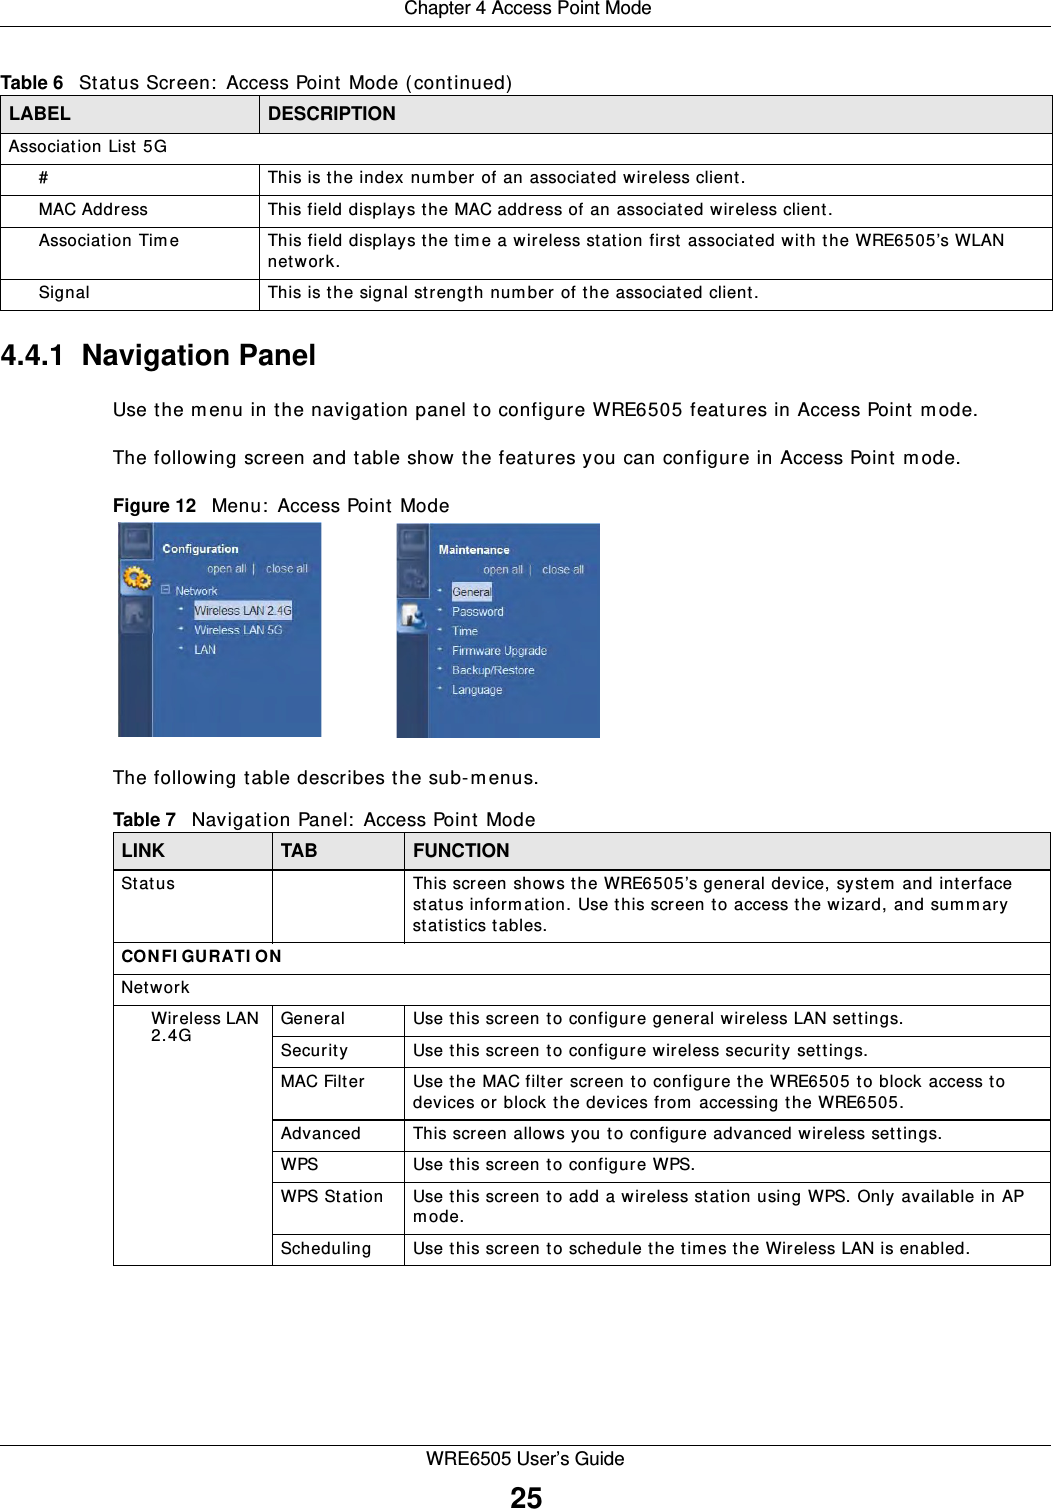  Chapter 4 Access Point ModeWRE6505 User’s Guide254.4.1  Navigation PanelUse the m enu in the navigation panel to configure WRE6505 features in Access Point m ode.The following screen and table show the features you can configure in Access Point m ode.Figure 12   Menu:  Access Point Mode The following table describes the sub-menus.Association List 5G# This is the index num ber of an associated wireless client .MAC Address This field displays the MAC address of an associated wireless client.Association Tim e This field displays the time a wireless station first associated with the WRE6505’s WLAN network.Signal This is the signal strengt h num ber of the associated client.Table 6   Status Screen:  Access Point Mode (continued)LABEL DESCRIPTIONTable 7   Navigation Panel:  Access Point ModeLINK TAB FUNCTIONStatus This screen shows the WRE6505’s general device, syst em and interface status information. Use this screen t o access the wizard, and summary statistics tables.CON FI GURATI ONNetworkWireless LAN 2.4G General Use this screen to configure general wireless LAN settings.Security Use this screen to configure wireless security settings.MAC Filter Use the MAC filter screen to configure the WRE6505 to block access to devices or block the devices from  accessing the WRE6505.Advanced This screen allows you to configure advanced wireless settings.WPS Use t his screen to configure WPS.WPS Station Use this screen to add a wireless station using WPS. Only available in AP mode.Scheduling Use this screen to schedule the tim es the Wireless LAN is enabled.